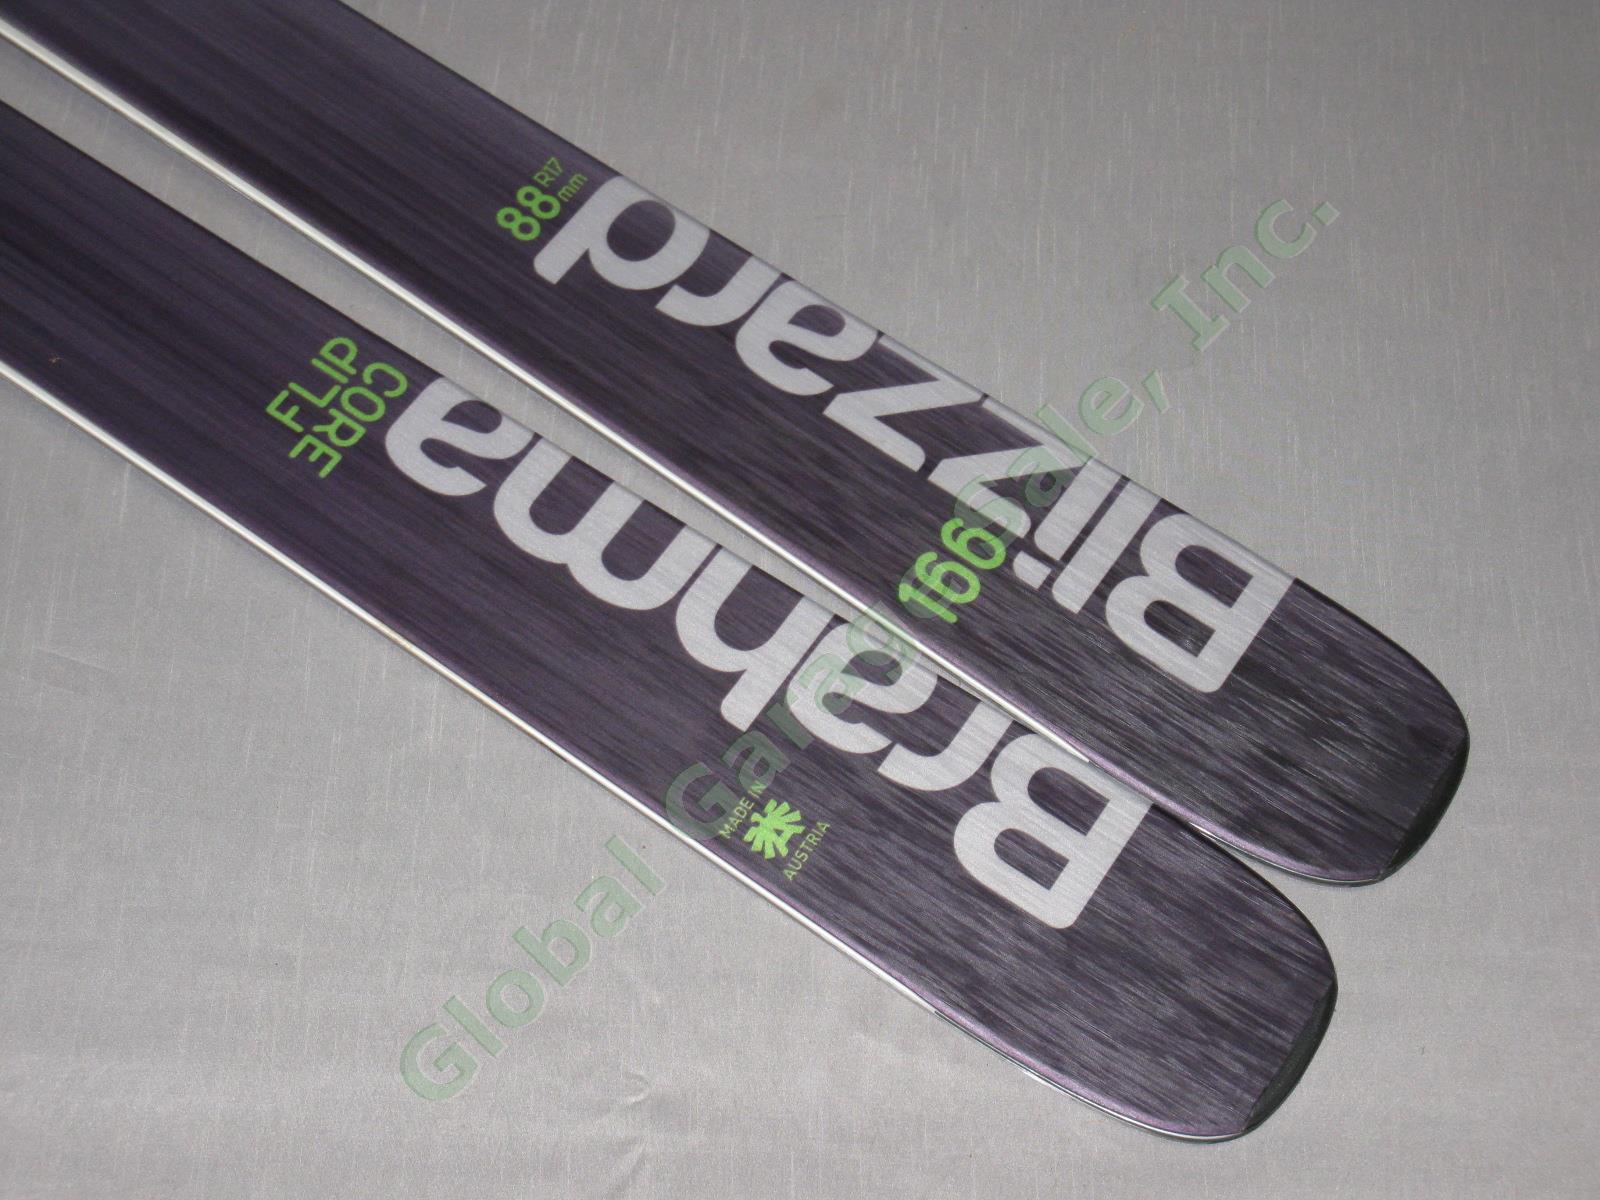 NEW 2016 Blizzard Brahma 166cm Flip Core Skis Made In Austria Never Mounted NR! 2